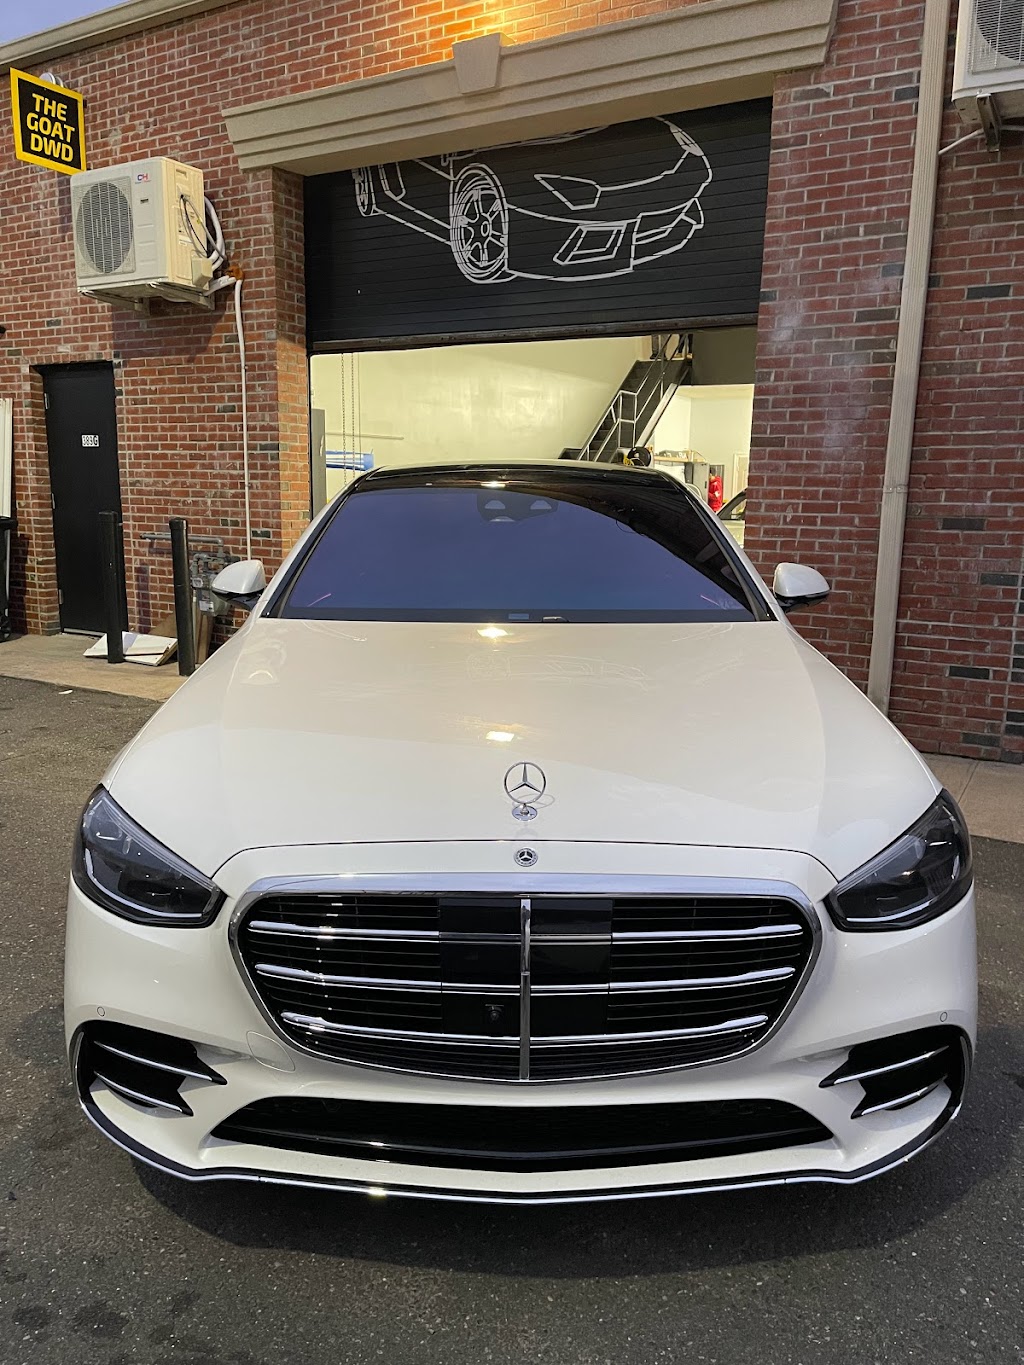 THE GOAT - Design Wrap Detail | 389 Wild Ave, Staten Island, NY 10314 | Phone: (646) 696-4286